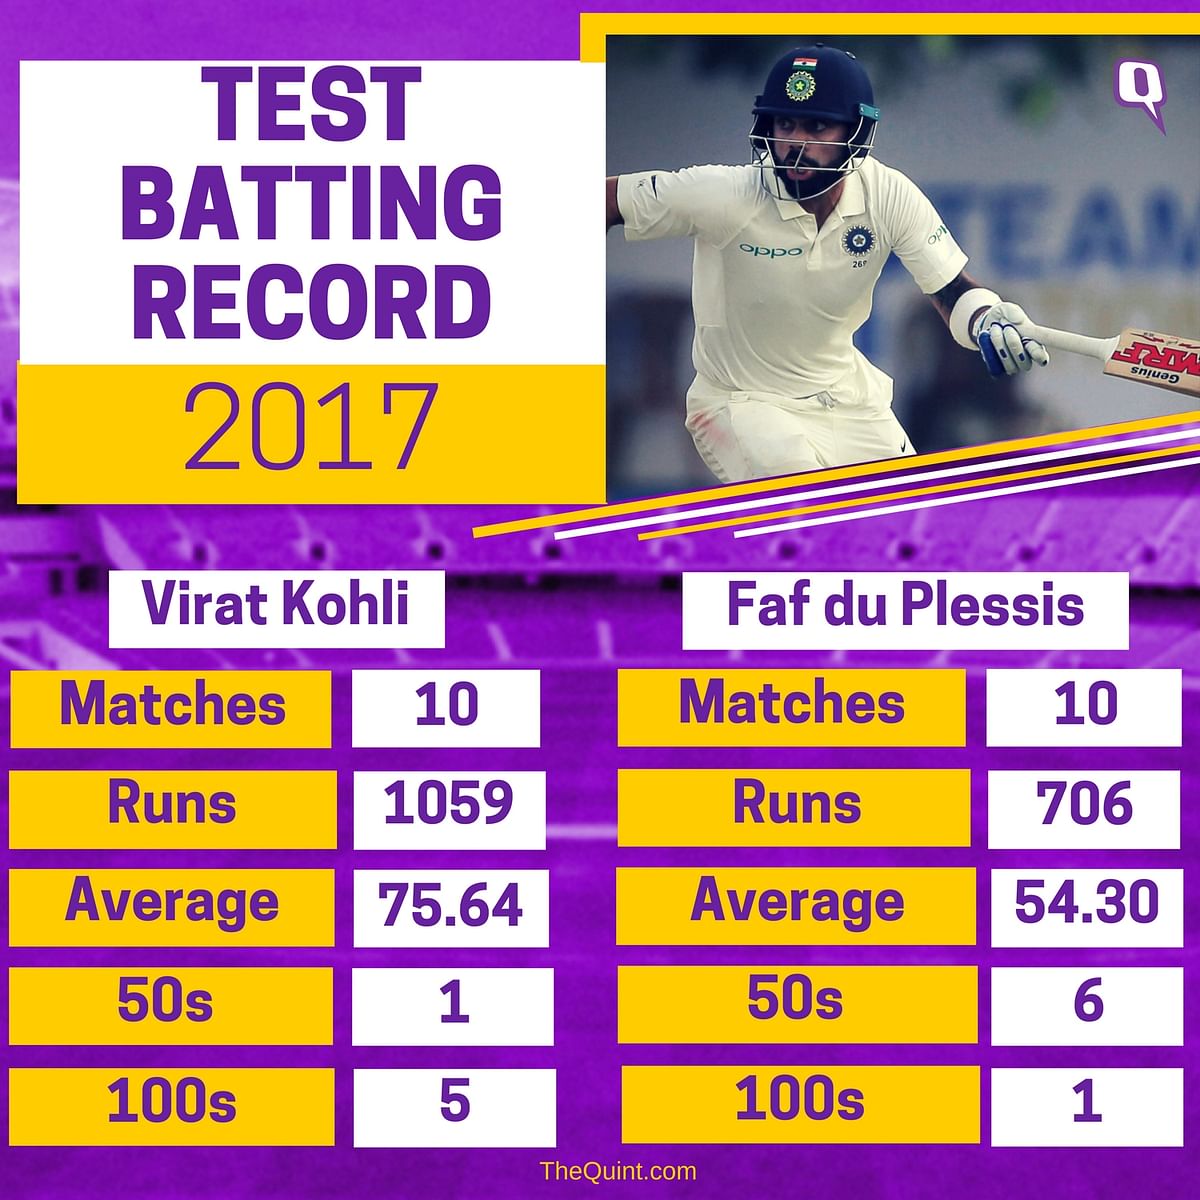 Ahead of the first Test between India and SA, here’s a comparison of form between counterparts in both the sides.